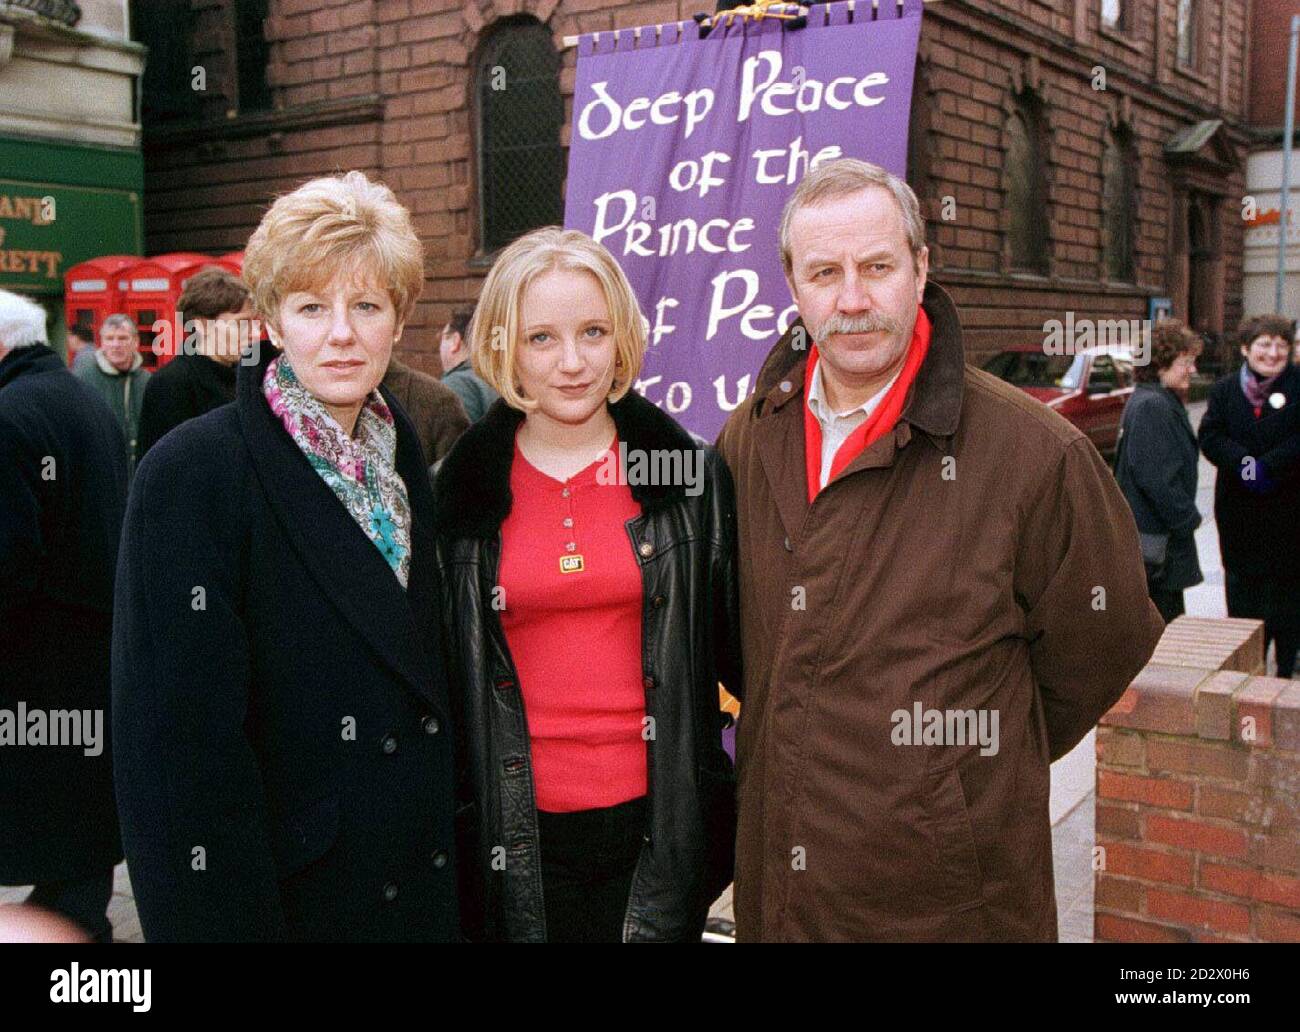 Wendy and Colin Parry with their daughter, Abigail, at a peace vigil in Warrington, Cheshire, this afternoon (Sunday). Their son, Tim, was killed in the IRA bomb centre in 1993. Photo by Brian Williamson/PA. Stock Photo